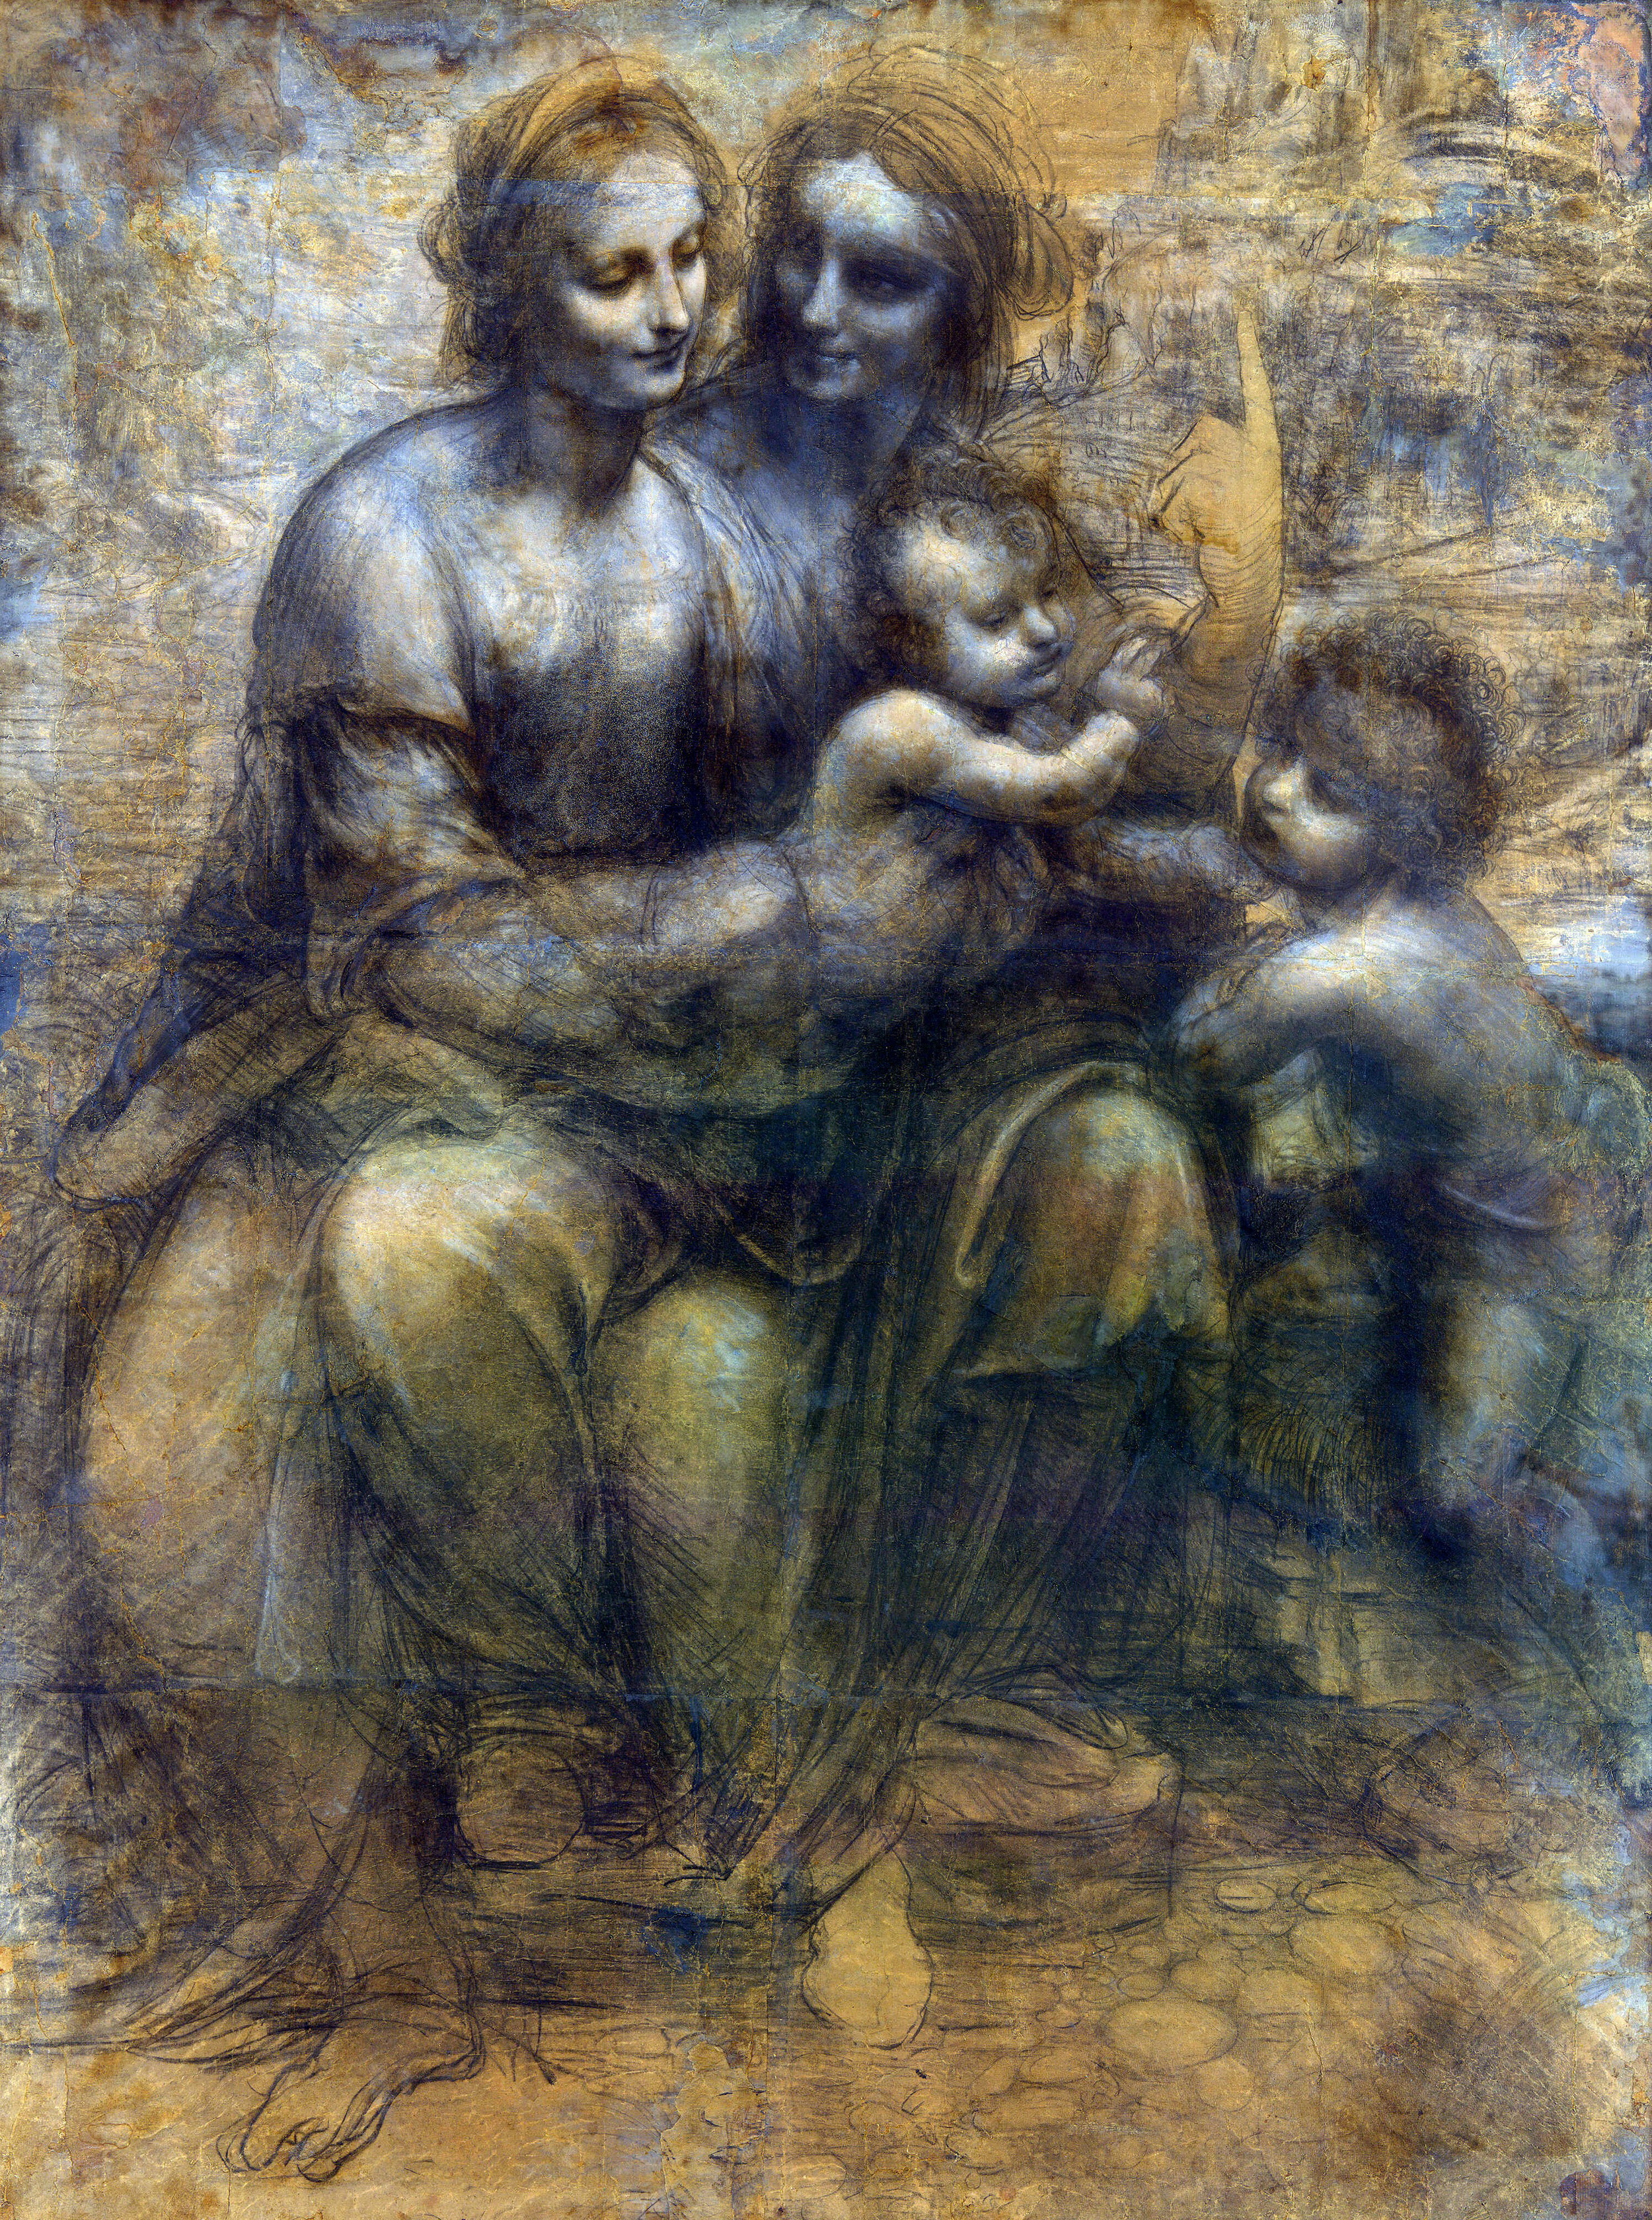 the-virgin-mary-and-christ-with-st-anne-and-the-young-st-john-the-baptist-by-leonardo-da-vinci-c-1501.jpg